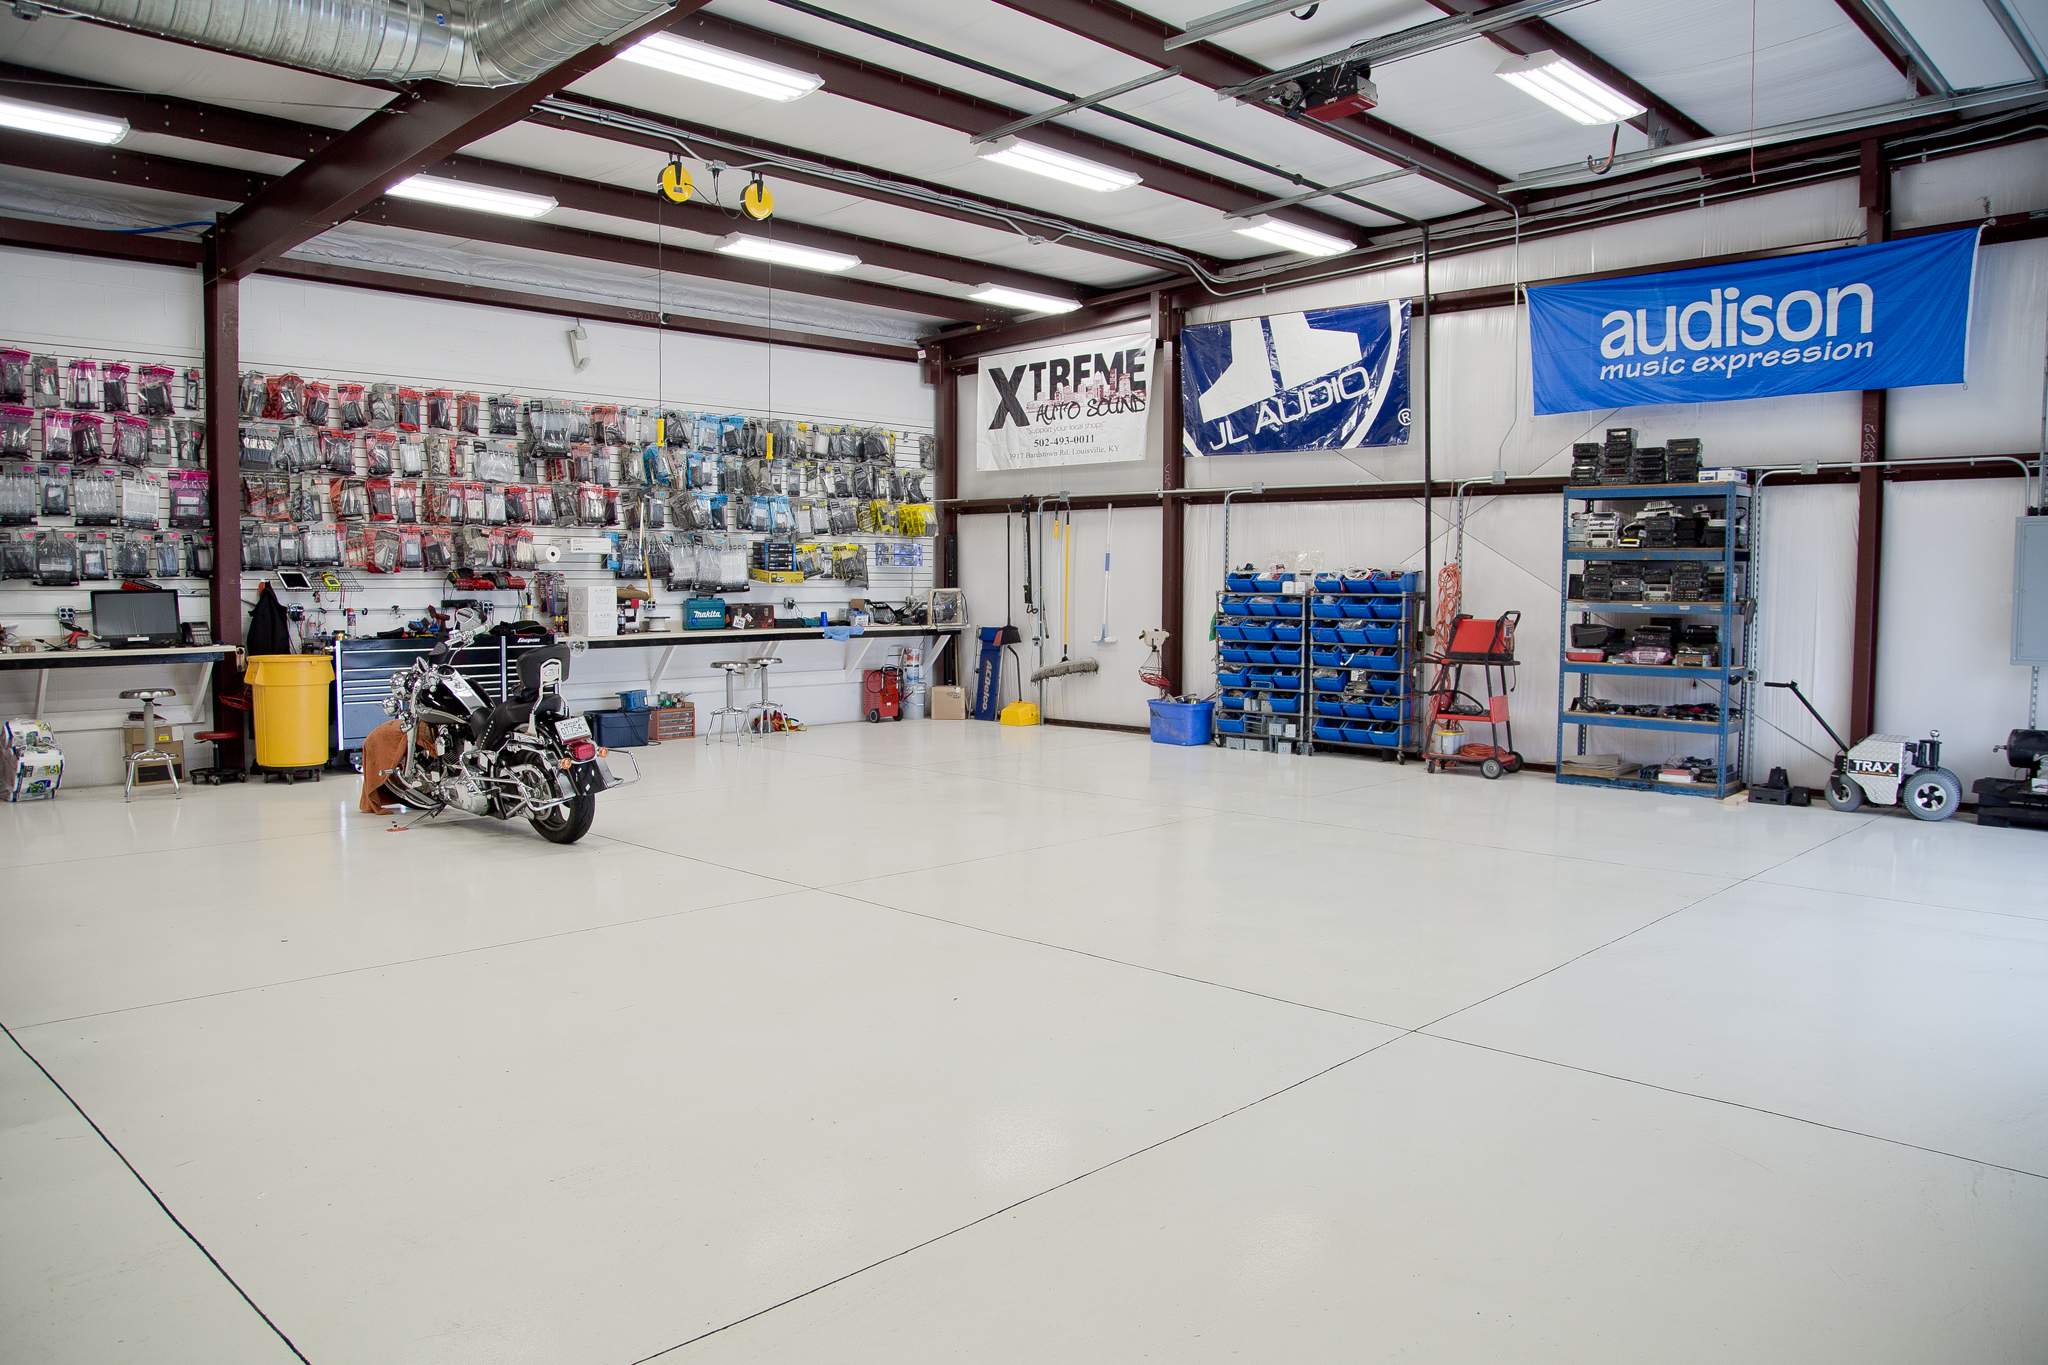 Open shop floor with motorcycle and audio accessories